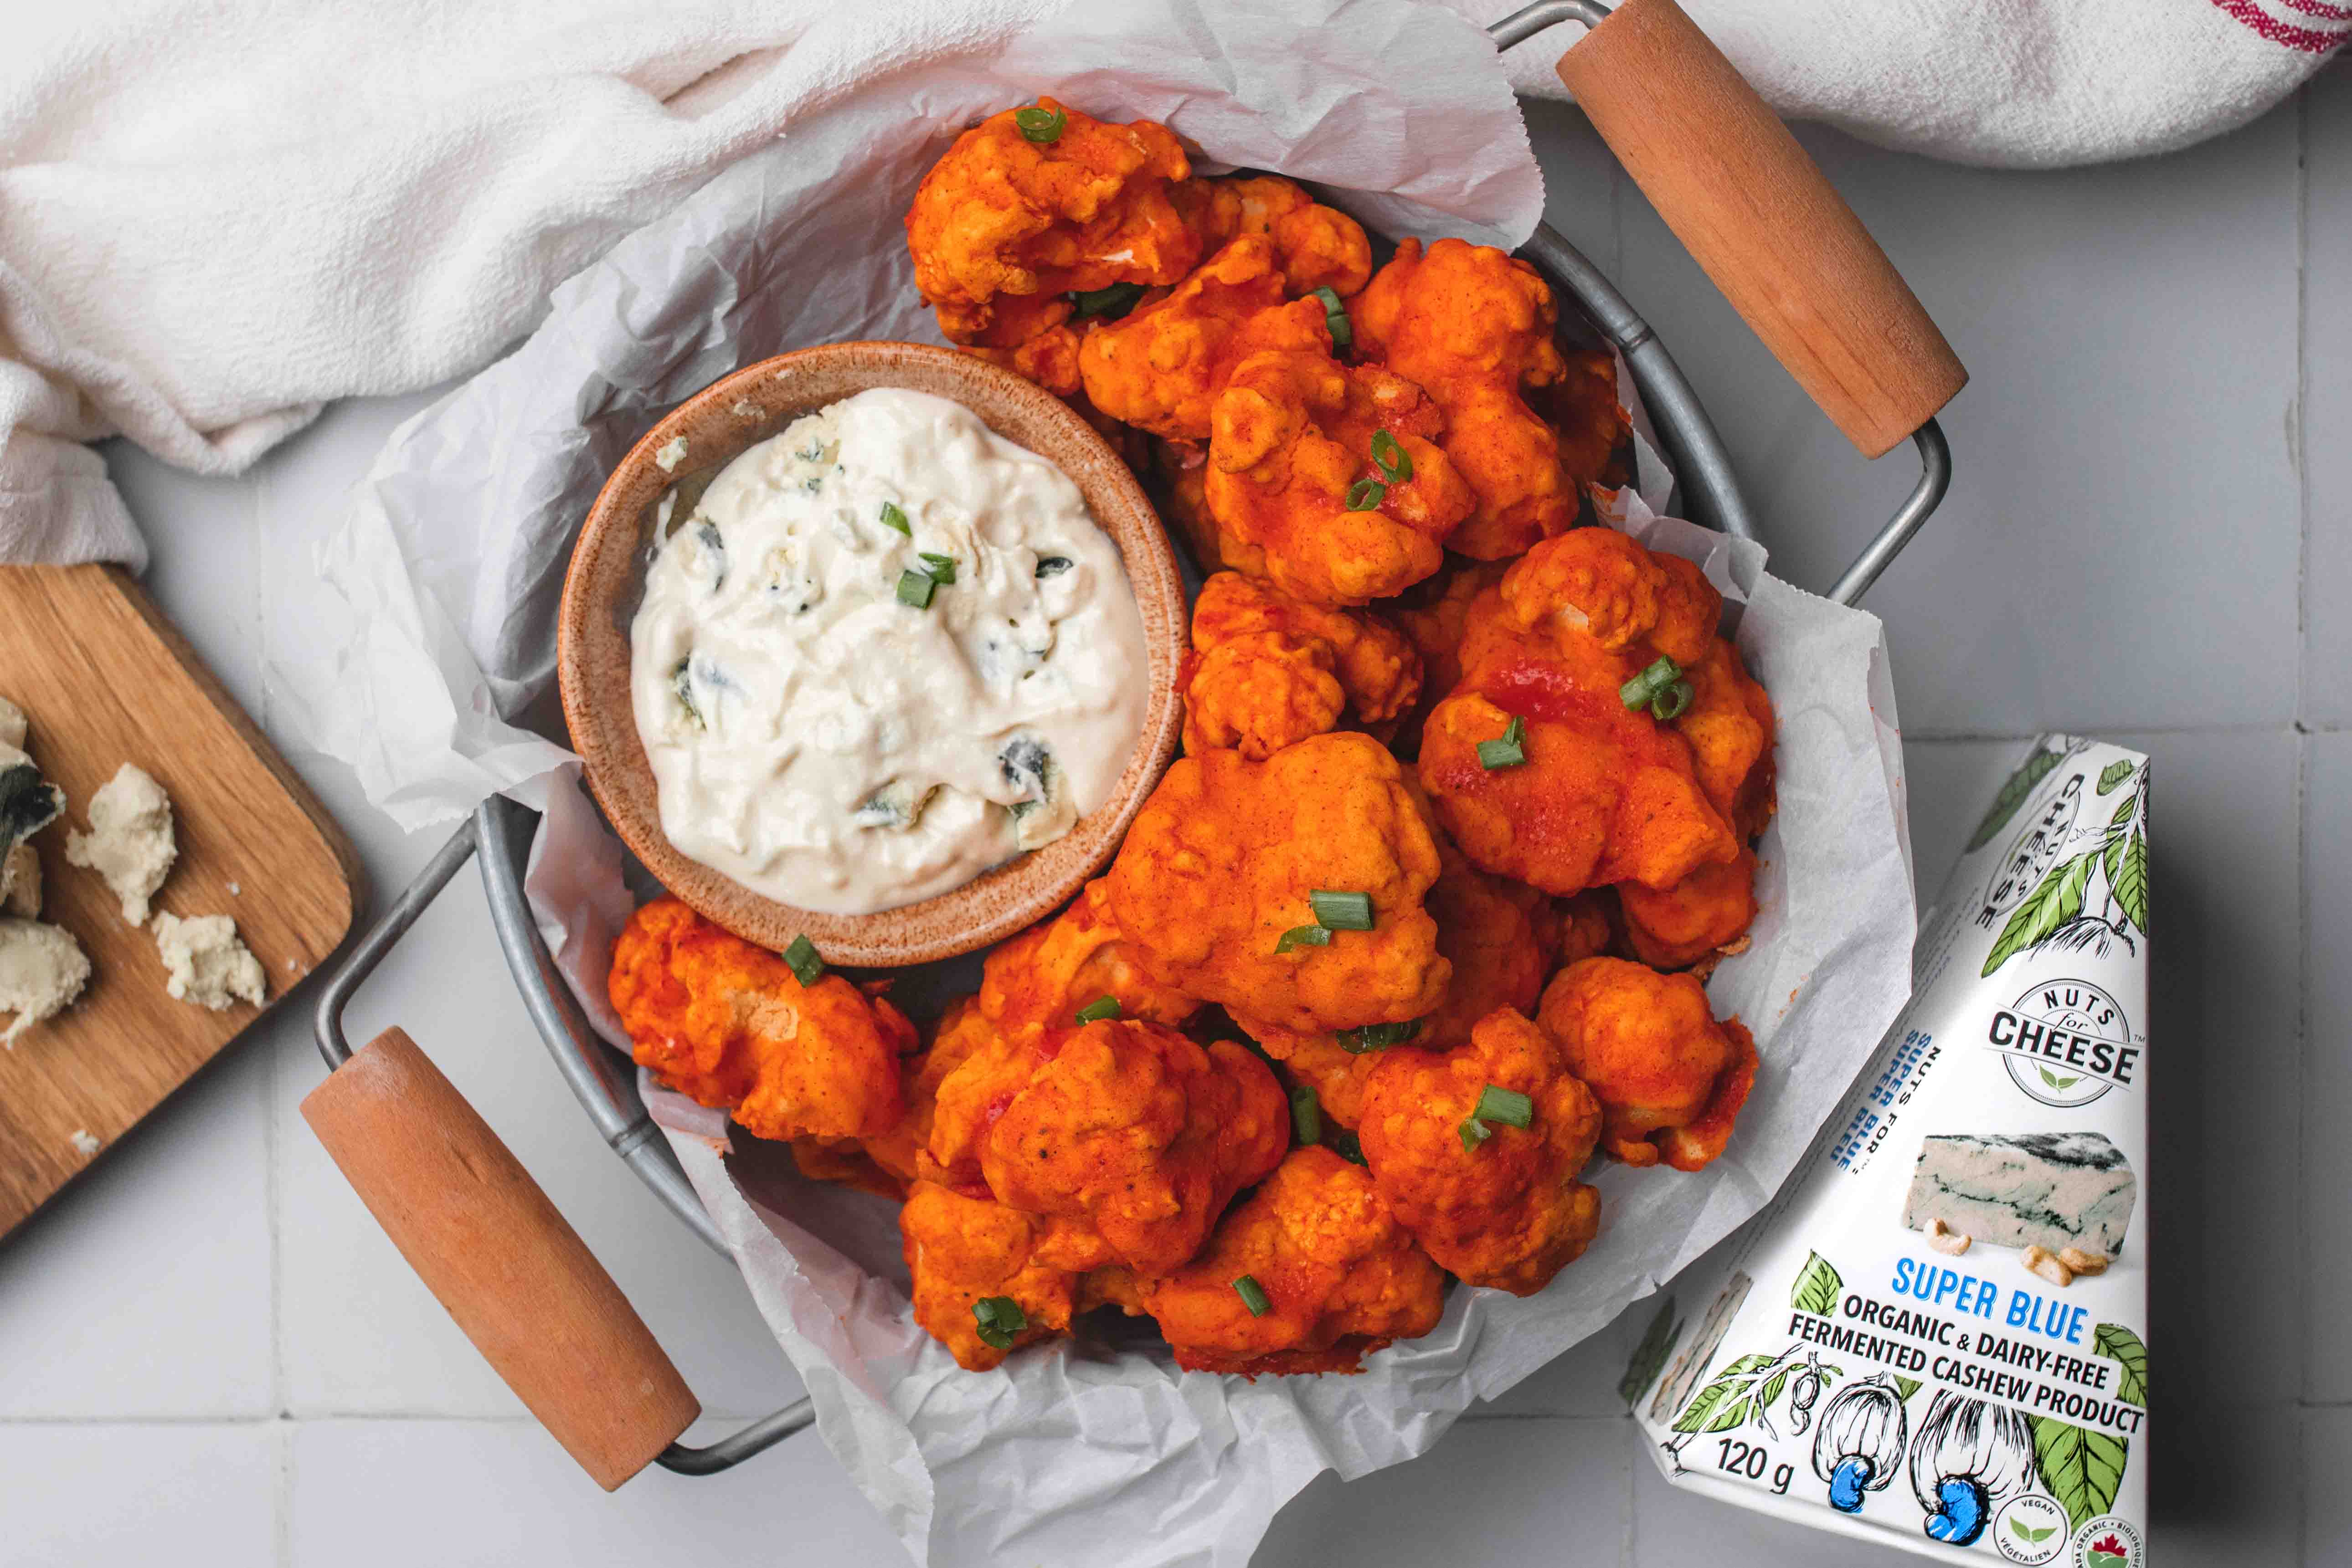 Bowl of buffalo-style cauliflower served with a side of dairy-free blue cheese dip beside a box of dairy-free blue cheese.